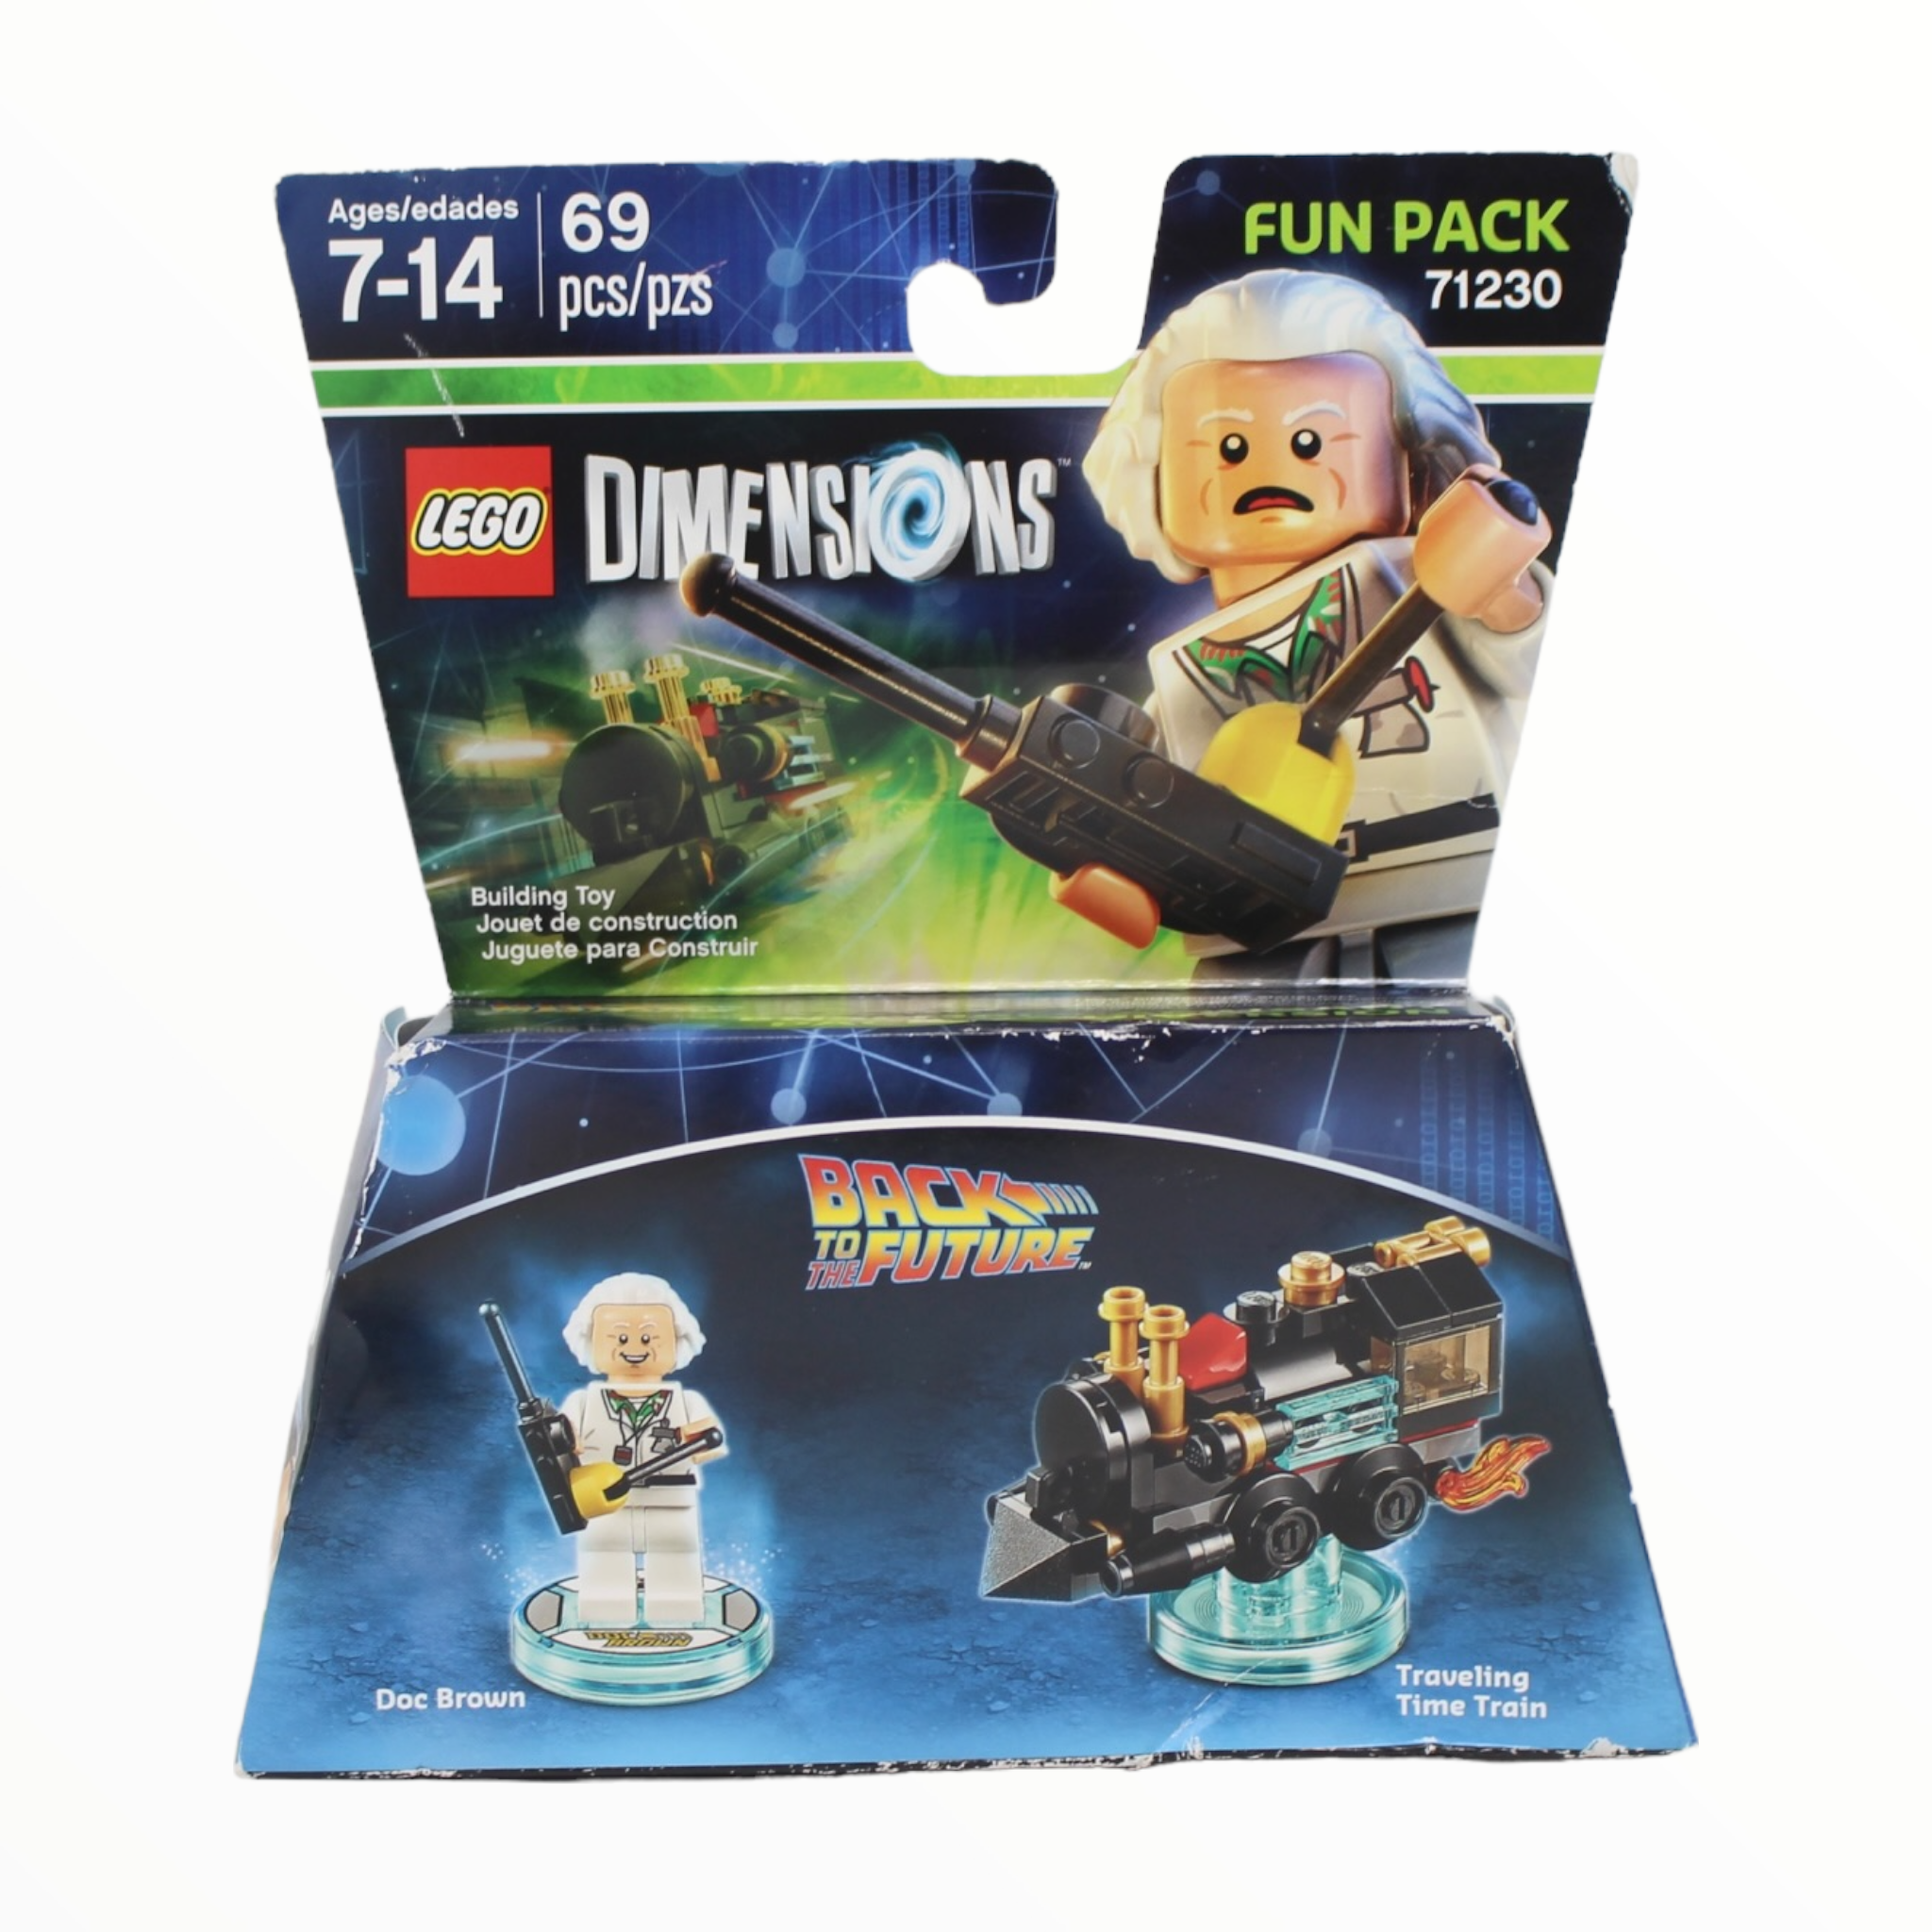 Retired Set 71230 Dimensions Fun Pack - Back to the Future Doc Brown and Traveling Time Train